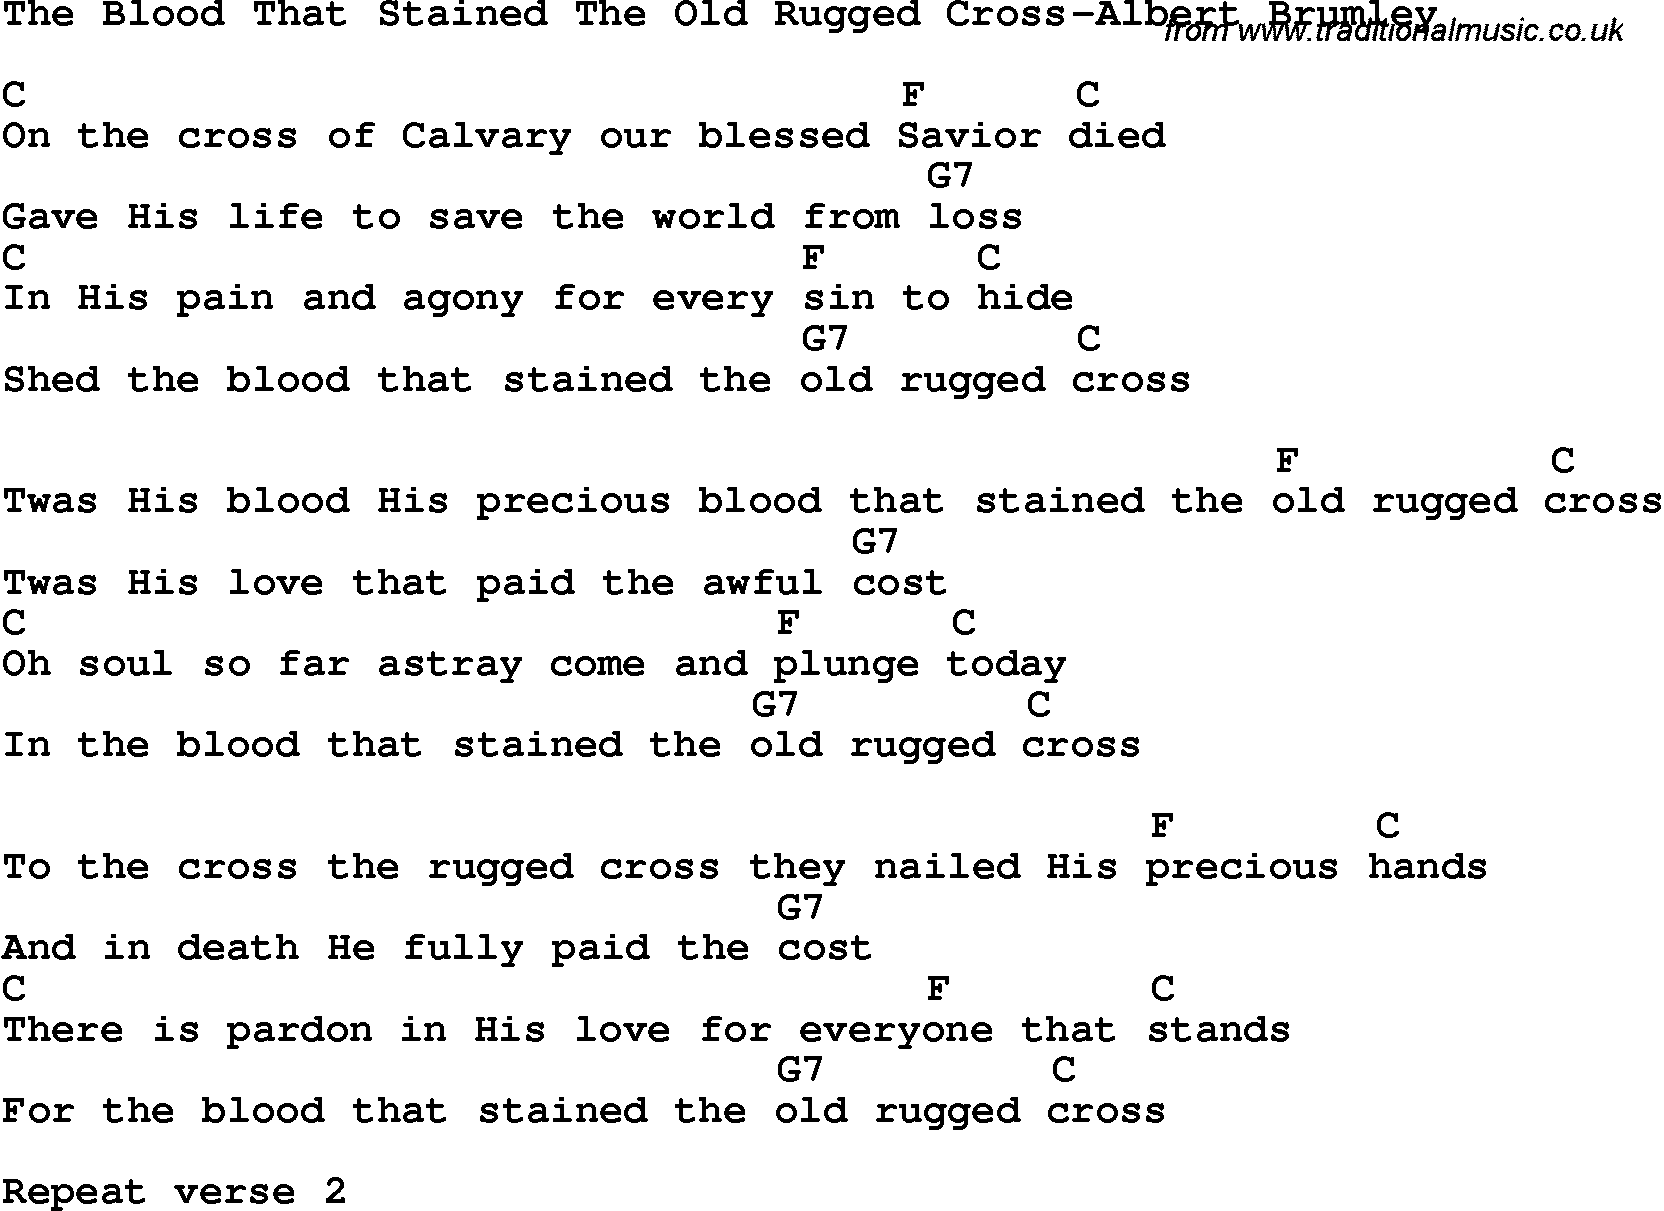 Country, Southern and Bluegrass Gospel Song The Blood That Stained The Old Rugged Cross-Albert Brumley lyrics and chords